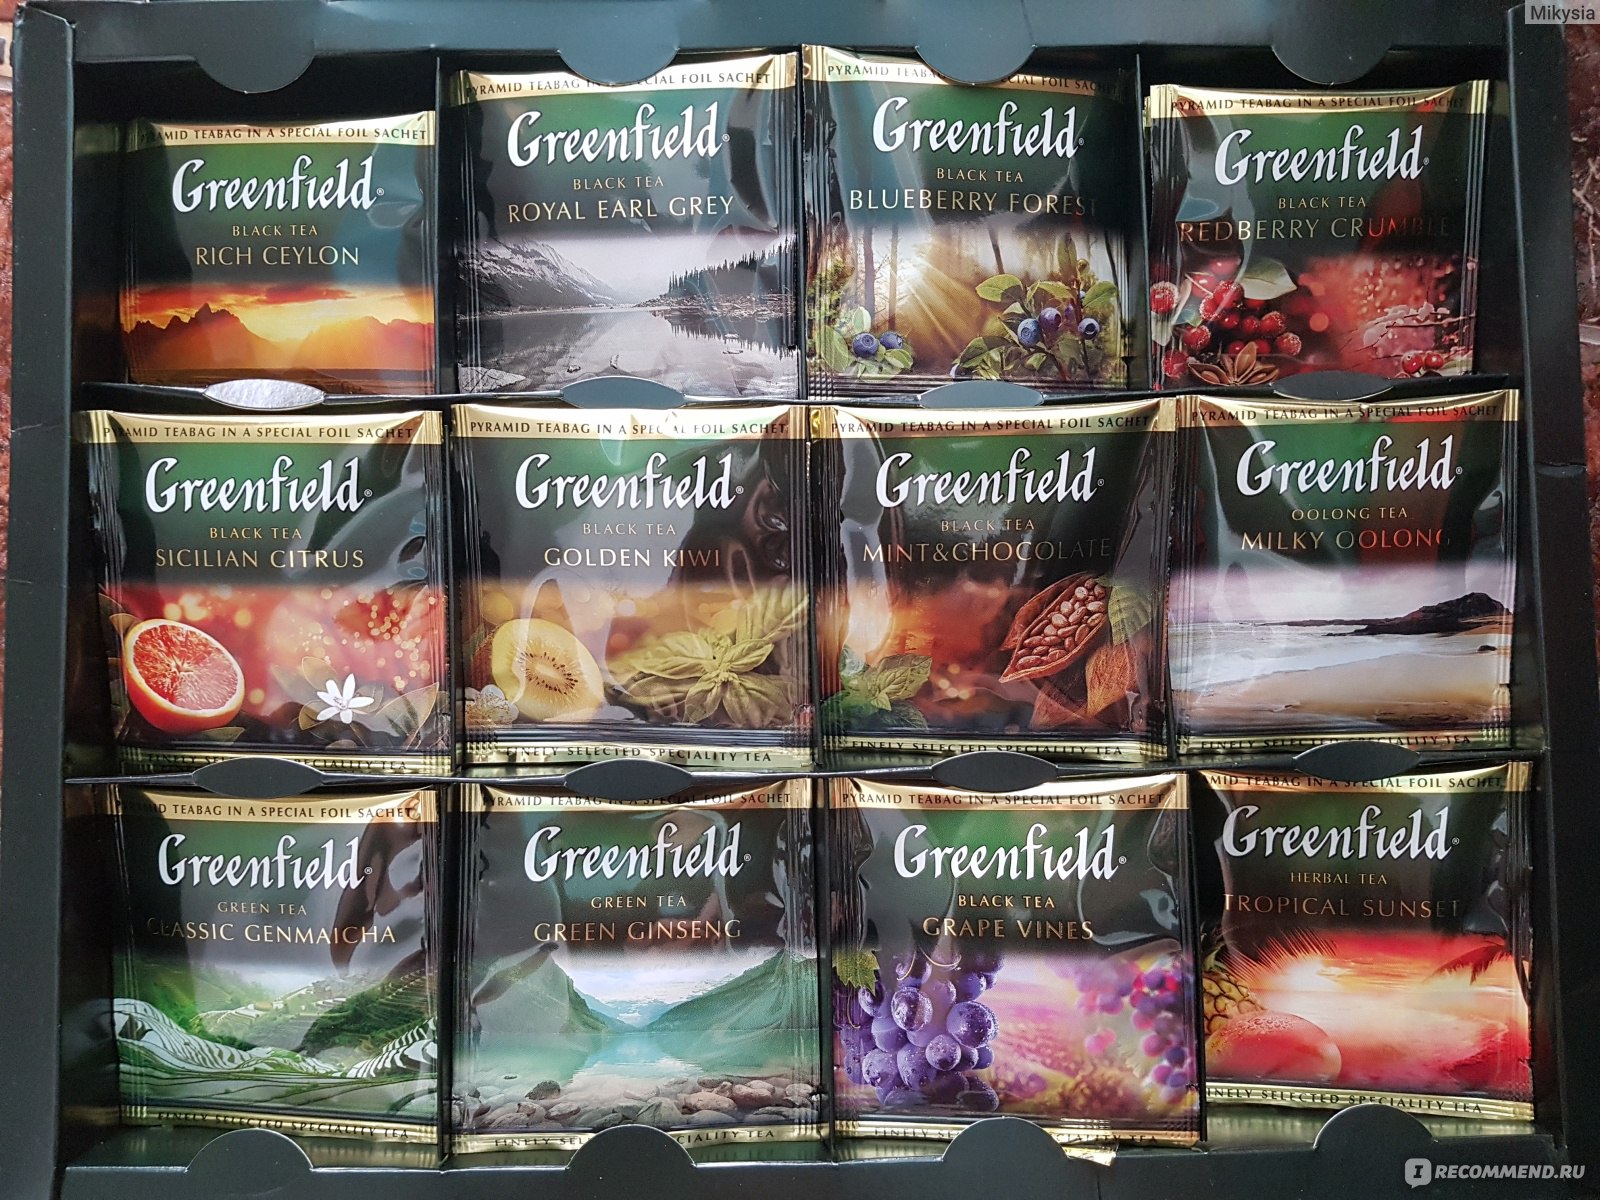 Greenfield Pyramid Tea collection